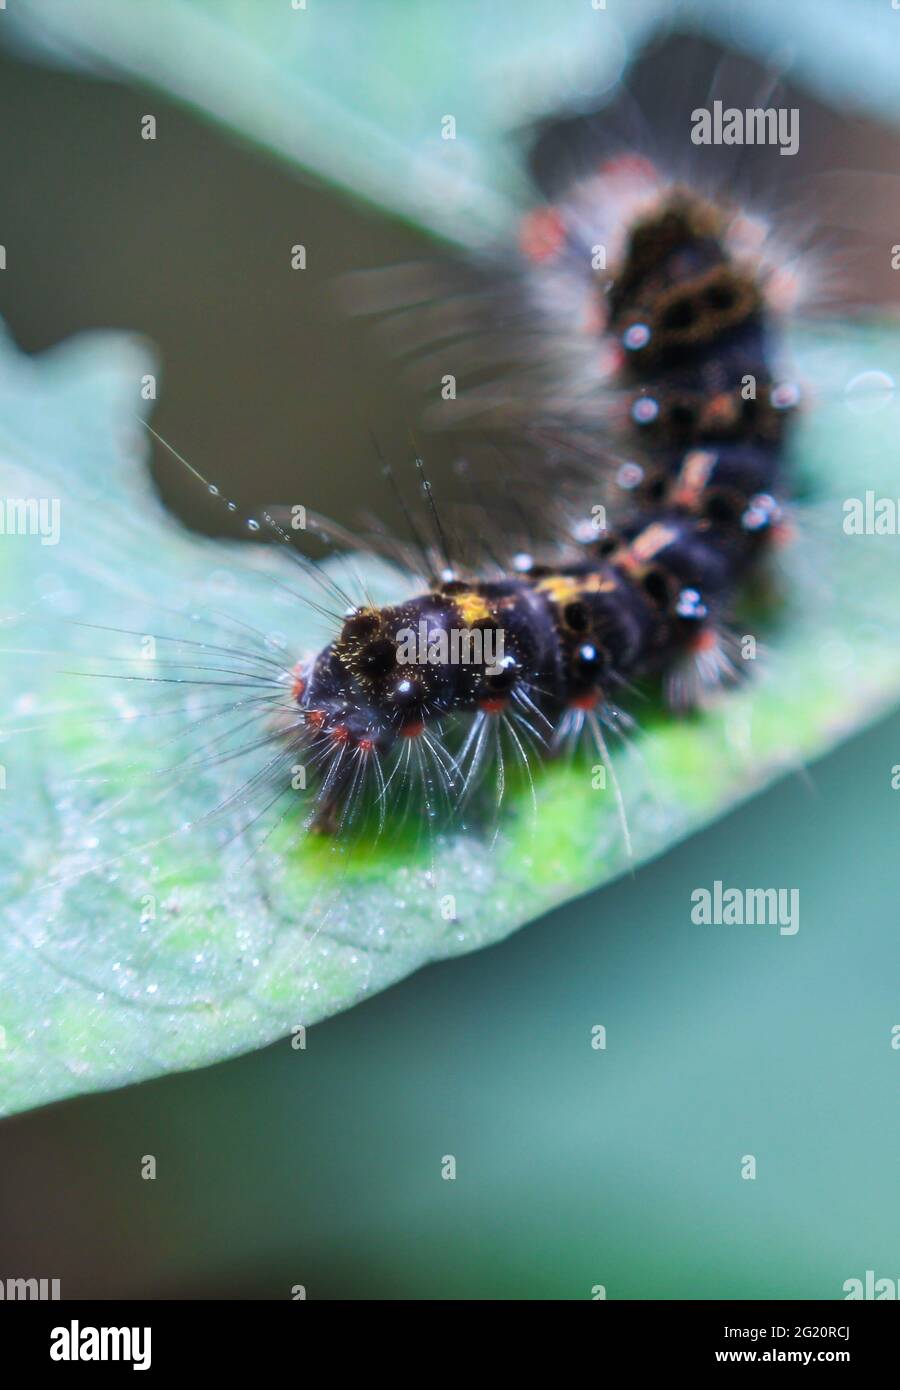 Caterpillar (lepidoptera)are voracious feeders and very damaging to crops. Hairy Caterpillar. Stinging caterpillar destroy vegetable leaf. Stock Photo